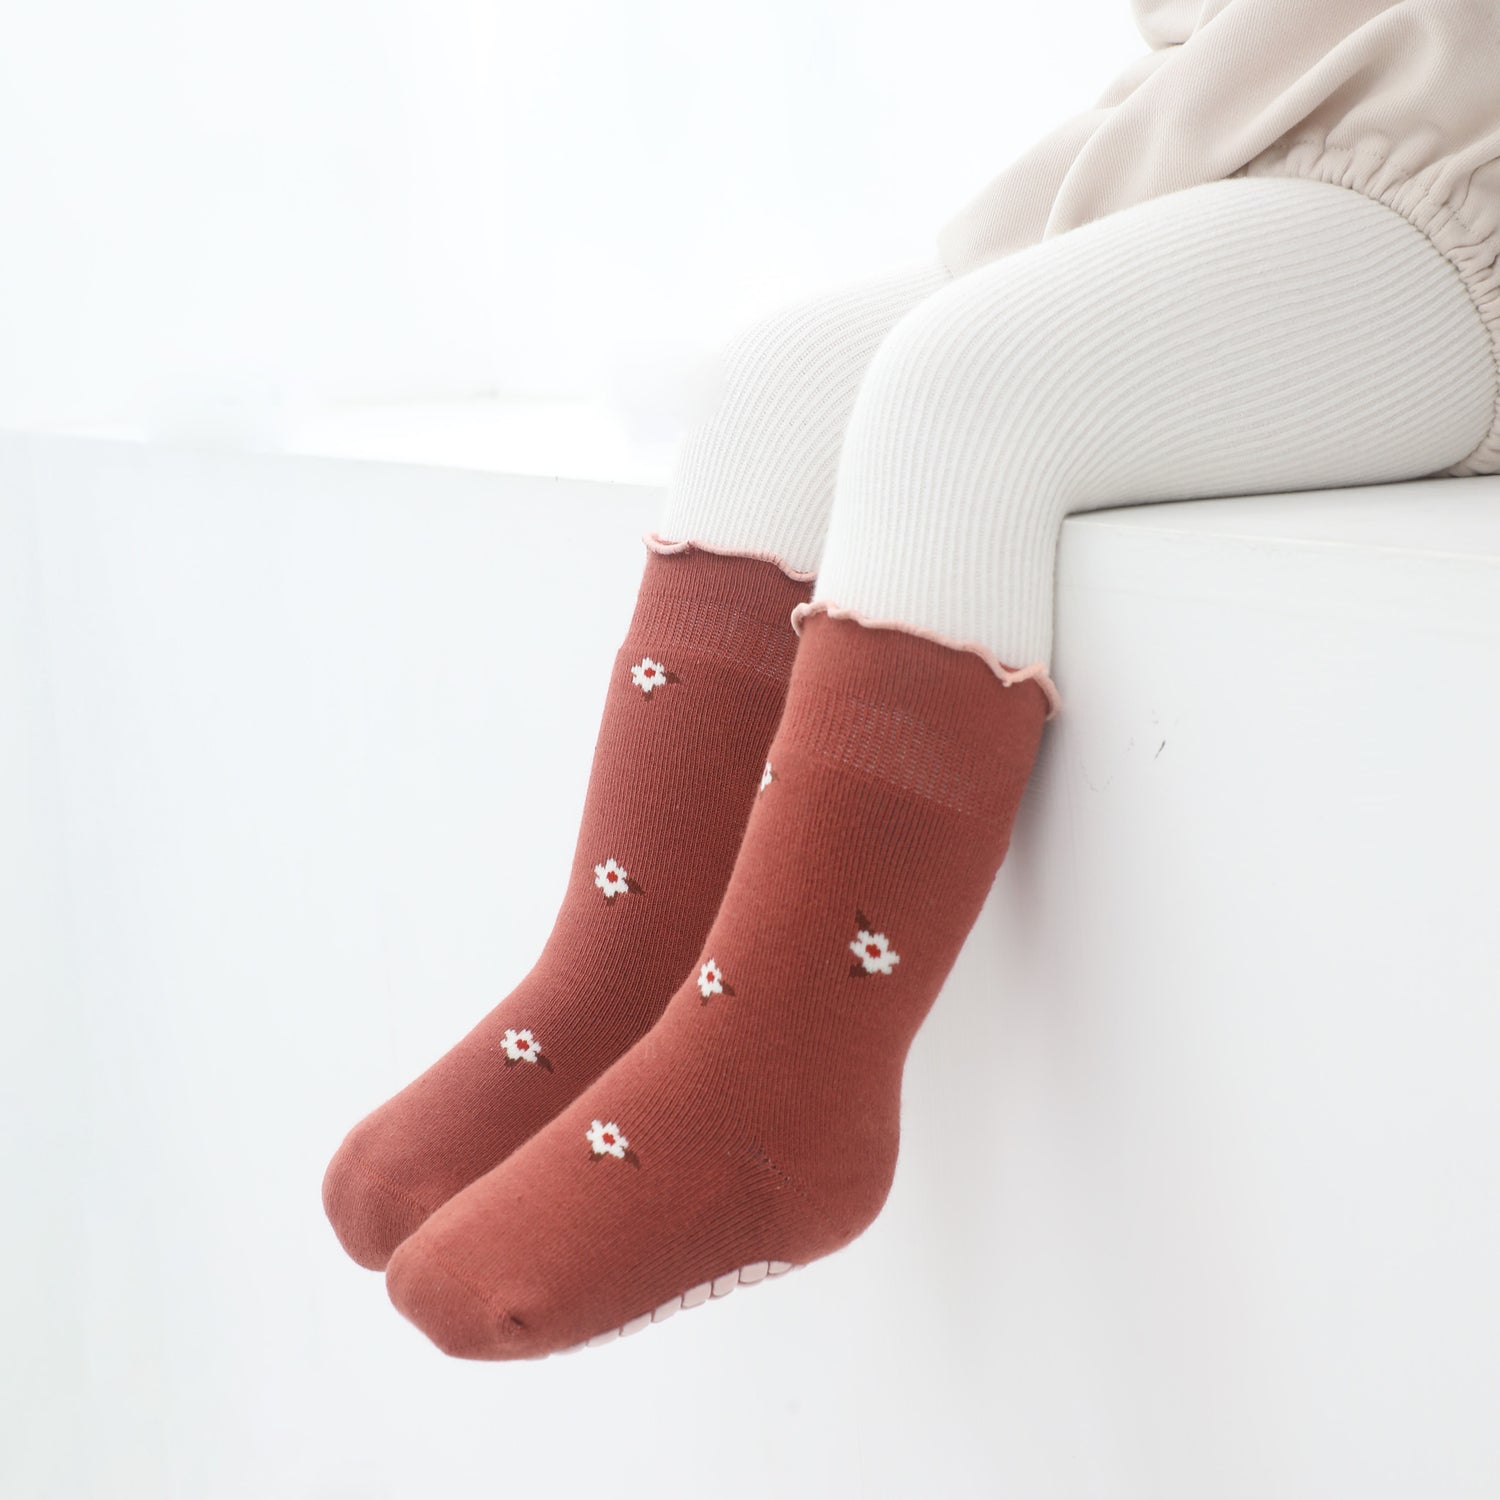 Sleek, socks designed to stay on small feet, perfect for a minimalist aesthetic.